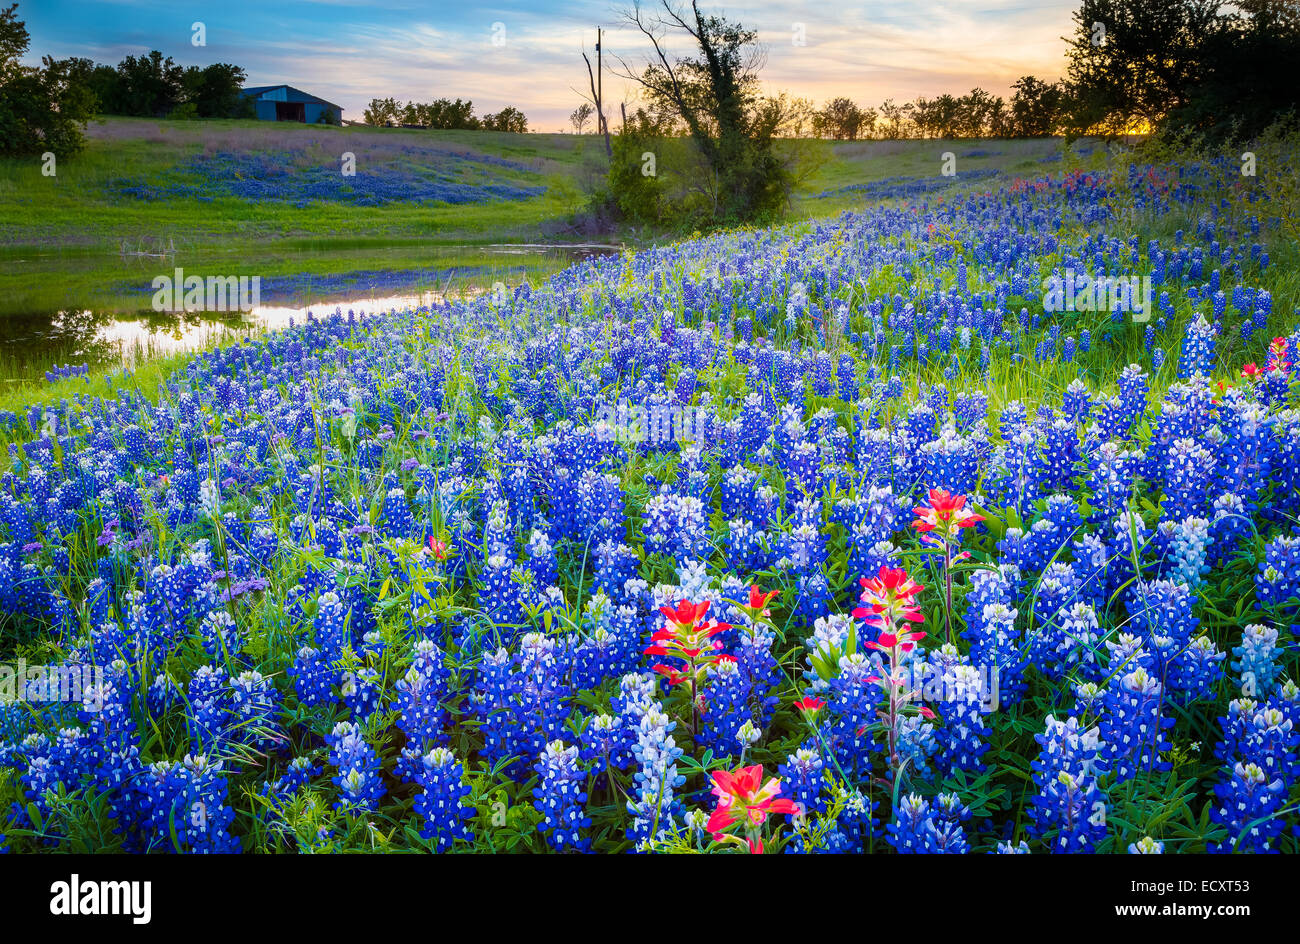 Texas paintbrush and bluebonnets in Ennis, Texas. Lupinus texensis, Texas bluebonnet, is a species of lupine endemic to Texas. Stock Photo